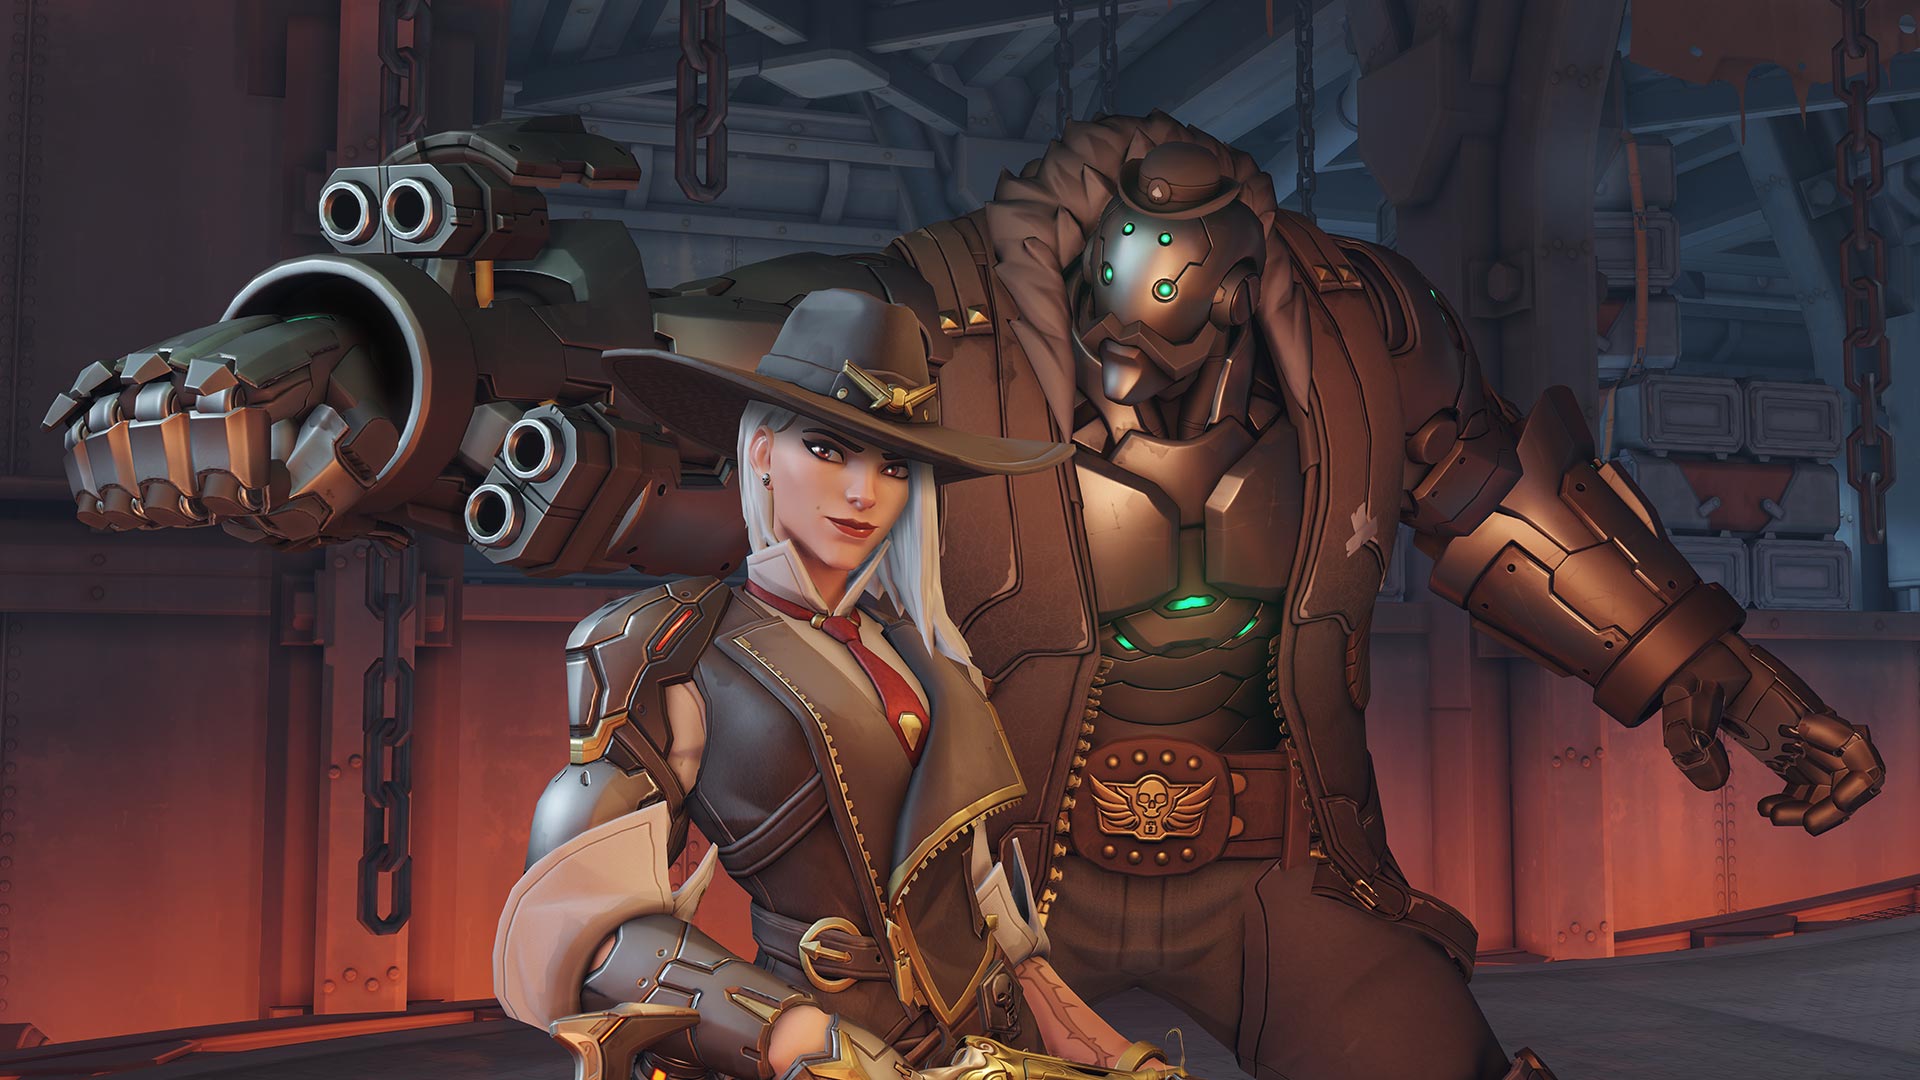 Ashe Announcement Means More of the Same